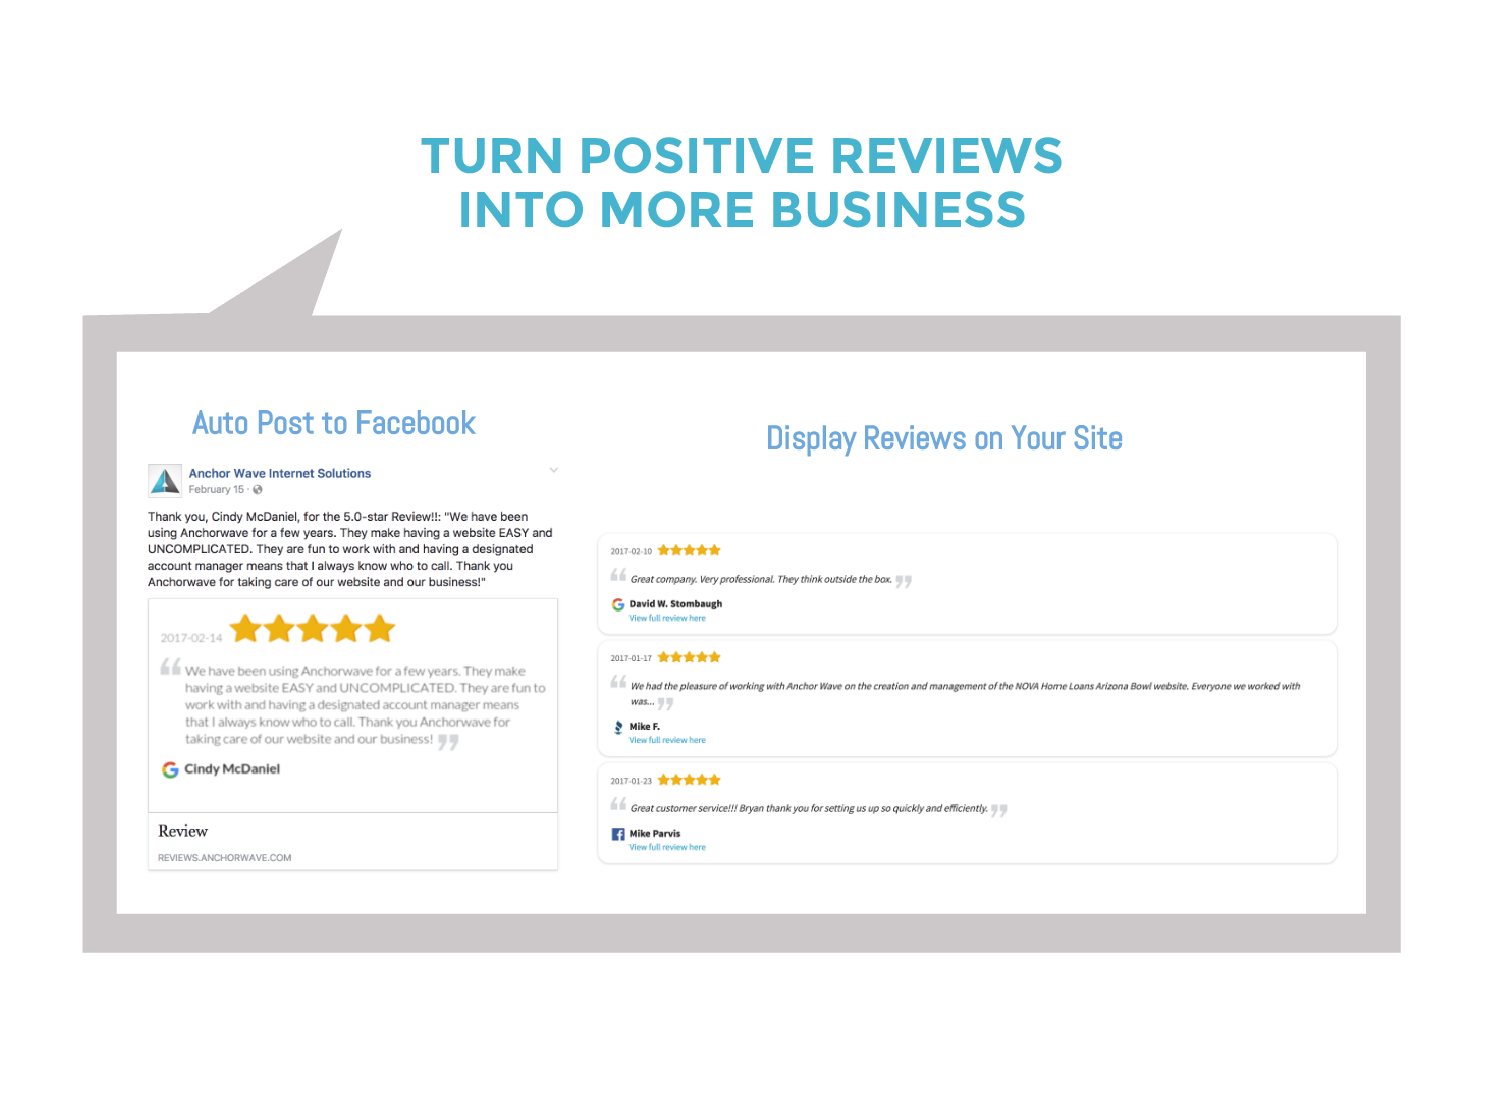 Turn Positive Reviews Into More Business